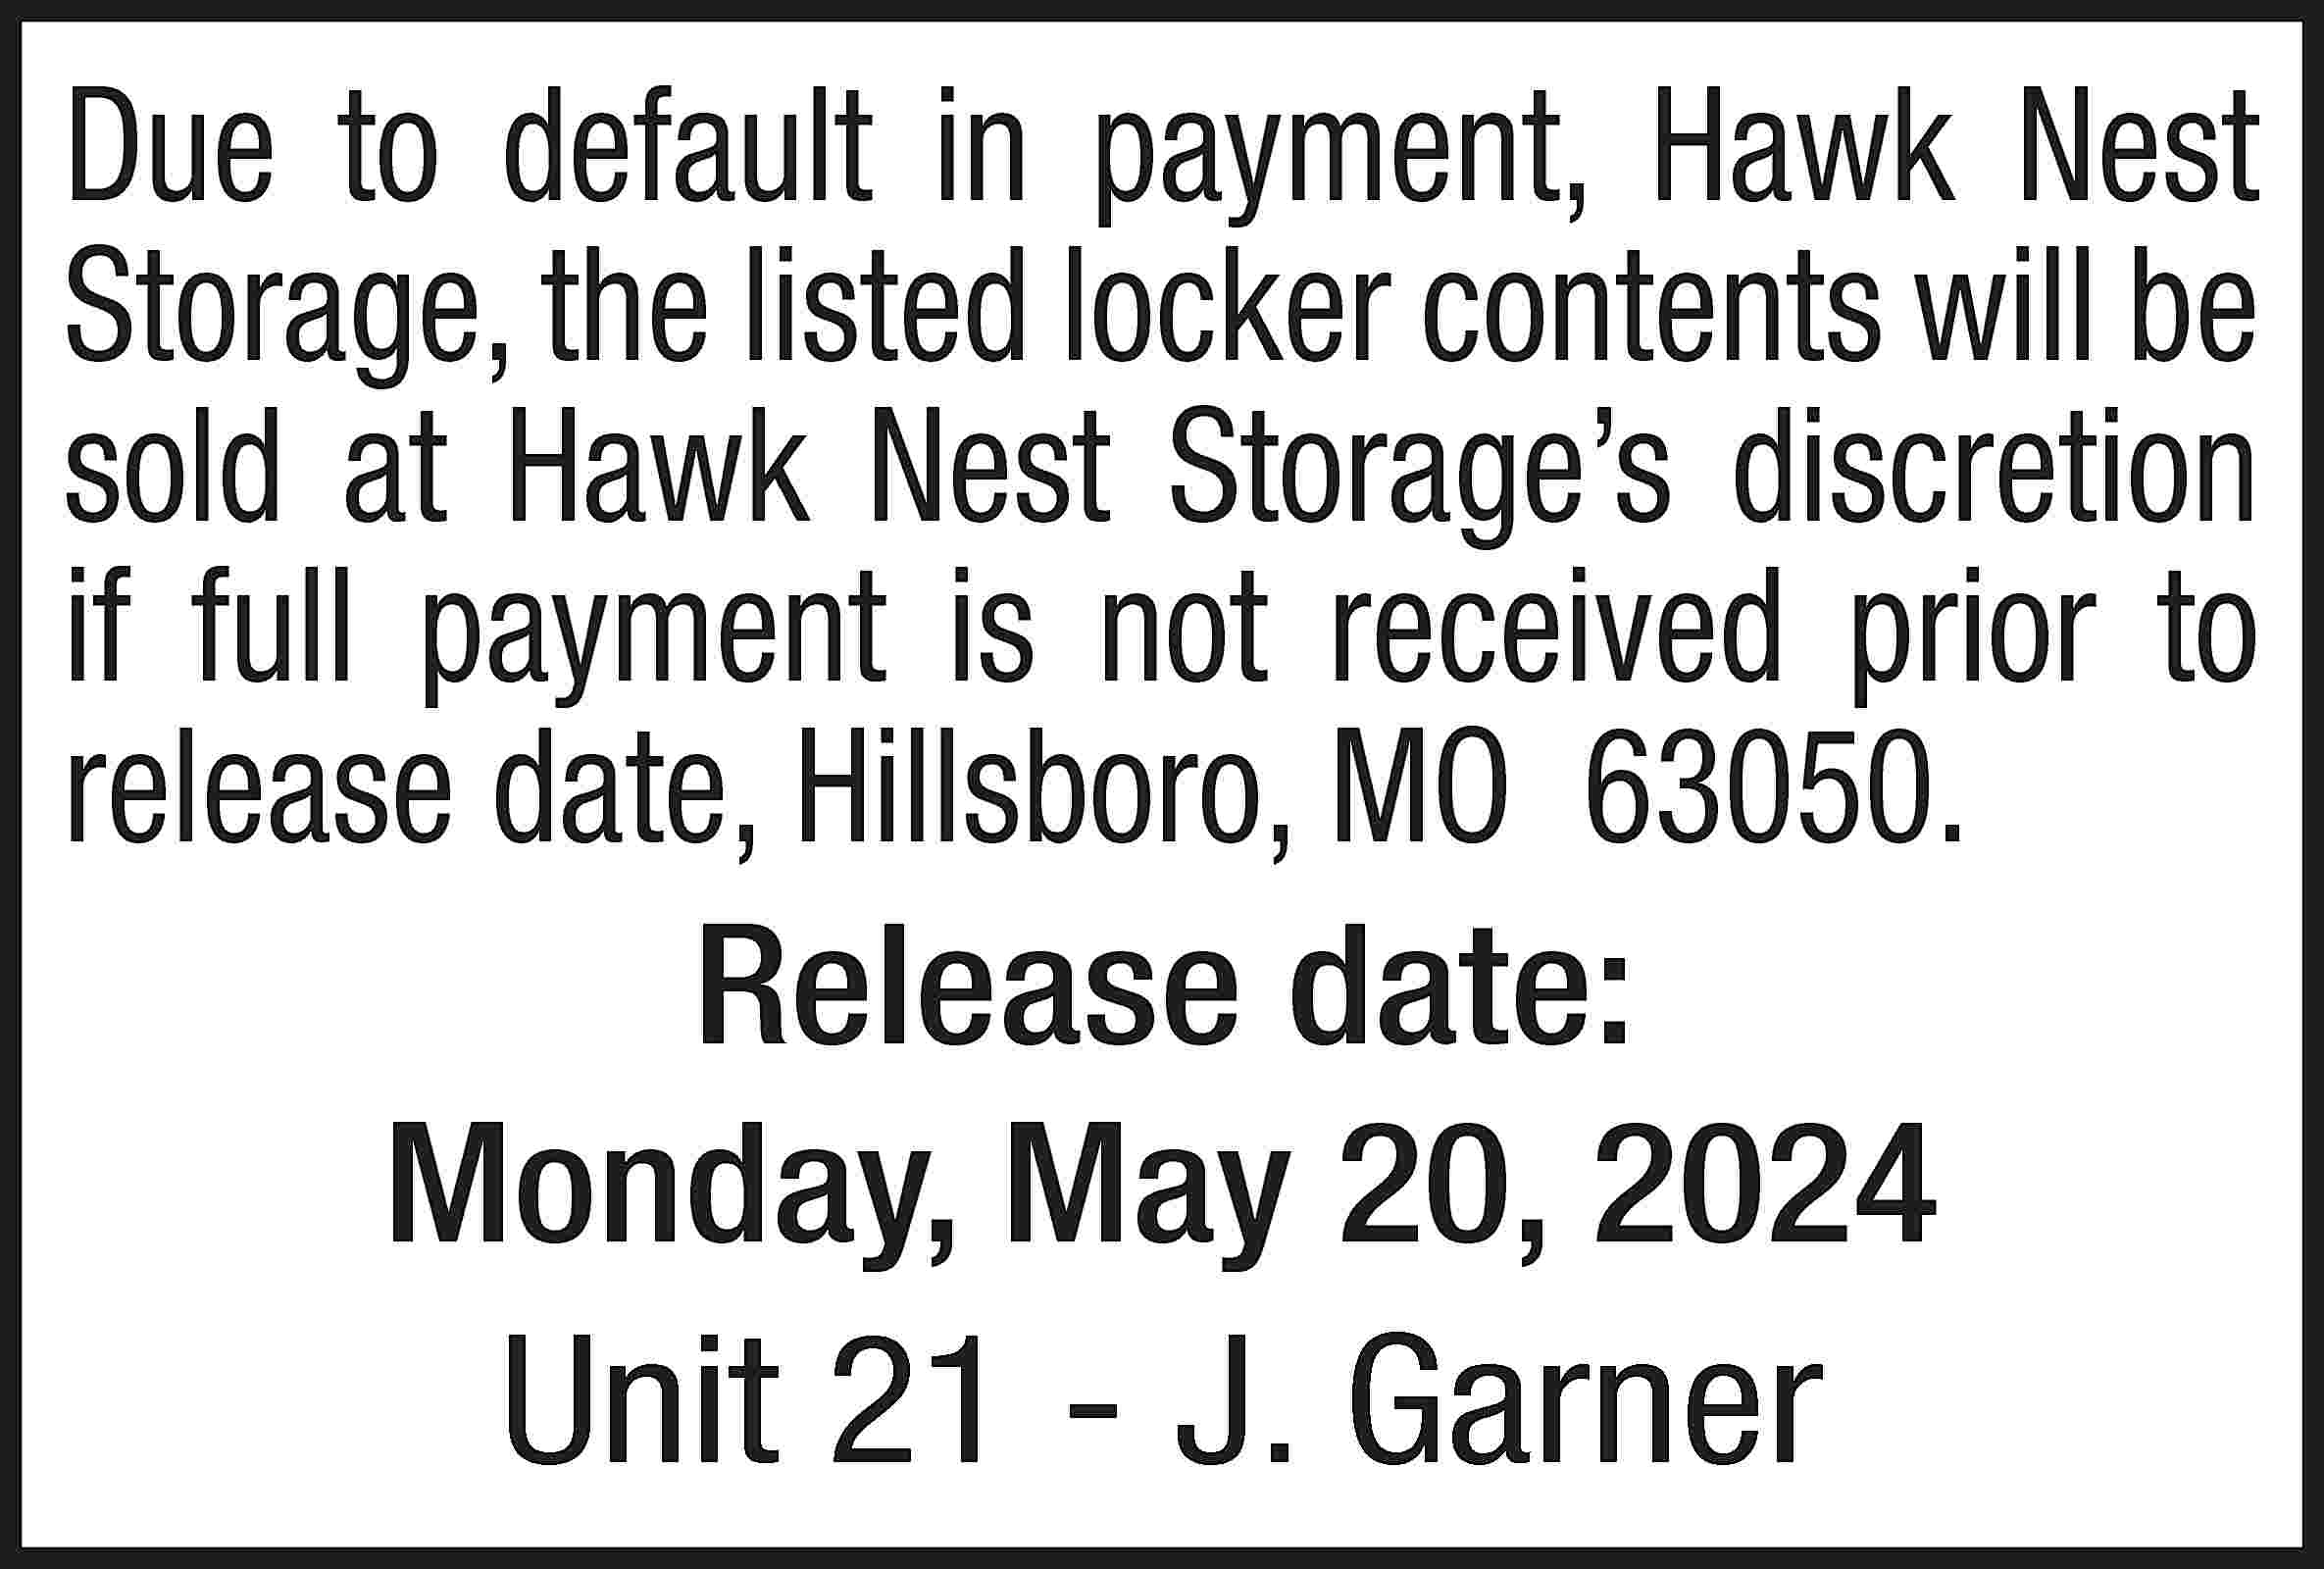 Due to default in payment,  Due to default in payment, Hawk Nest Storage, the listed locker contents will be sold at Hawk Nest Storage’s discretion if full payment is not received prior to release date, Hillsboro, MO 63050. Release date: Monday, May 20, 2024 Unit 21 - J. Garner